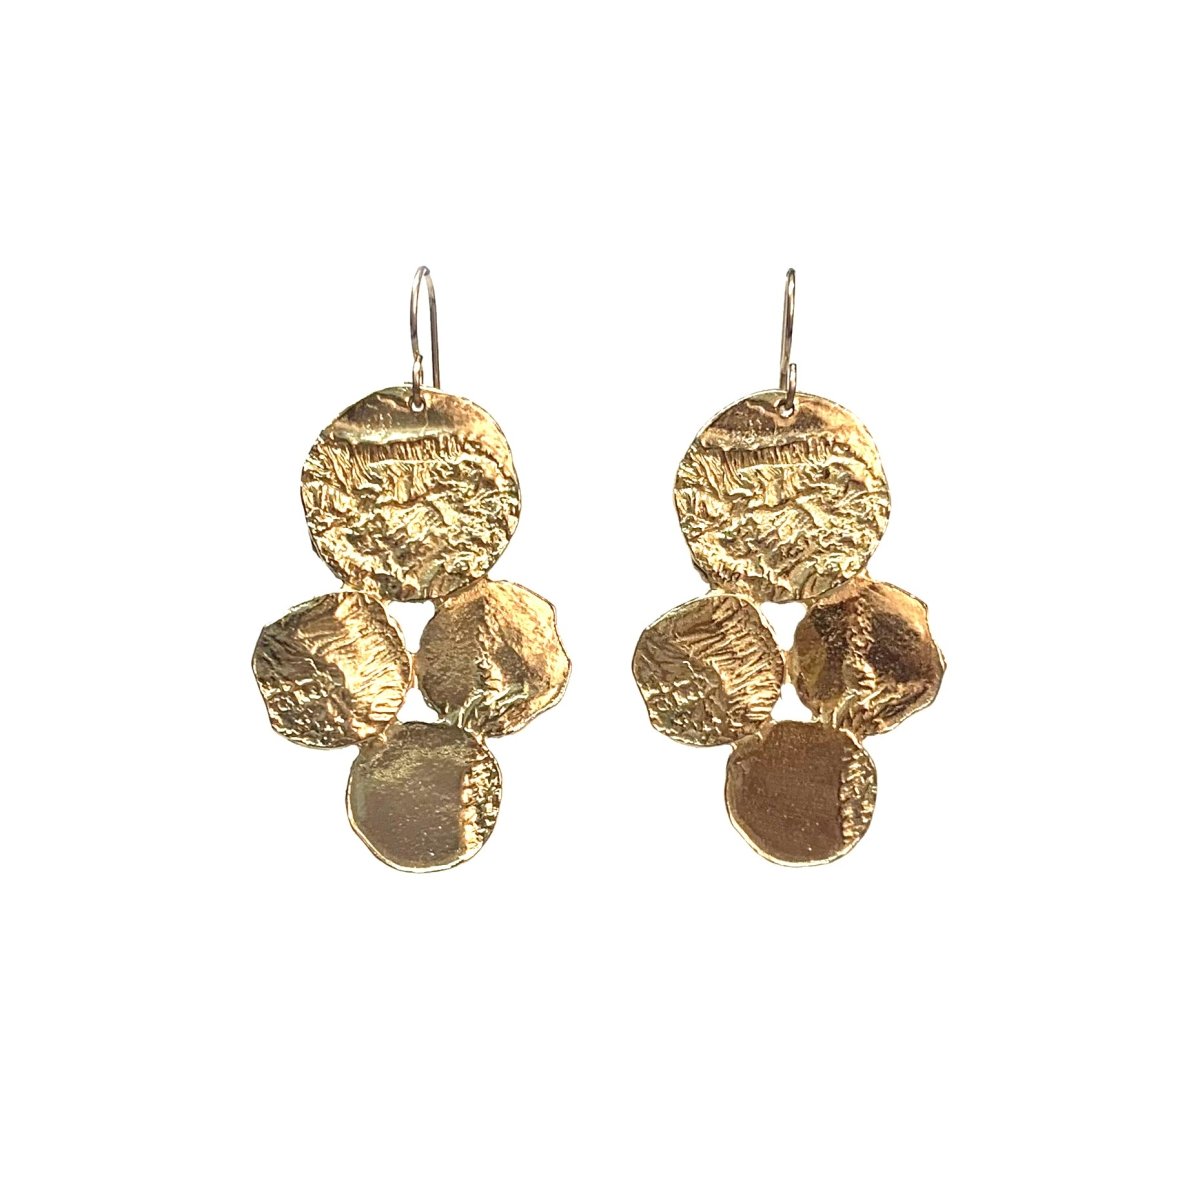 A pair of dangling brass earrings, with four coin-shape focal points. The brass is hammered slightly giving a nice texture. The Little Bit of Luck earrings are from designer Lingua Nigra.